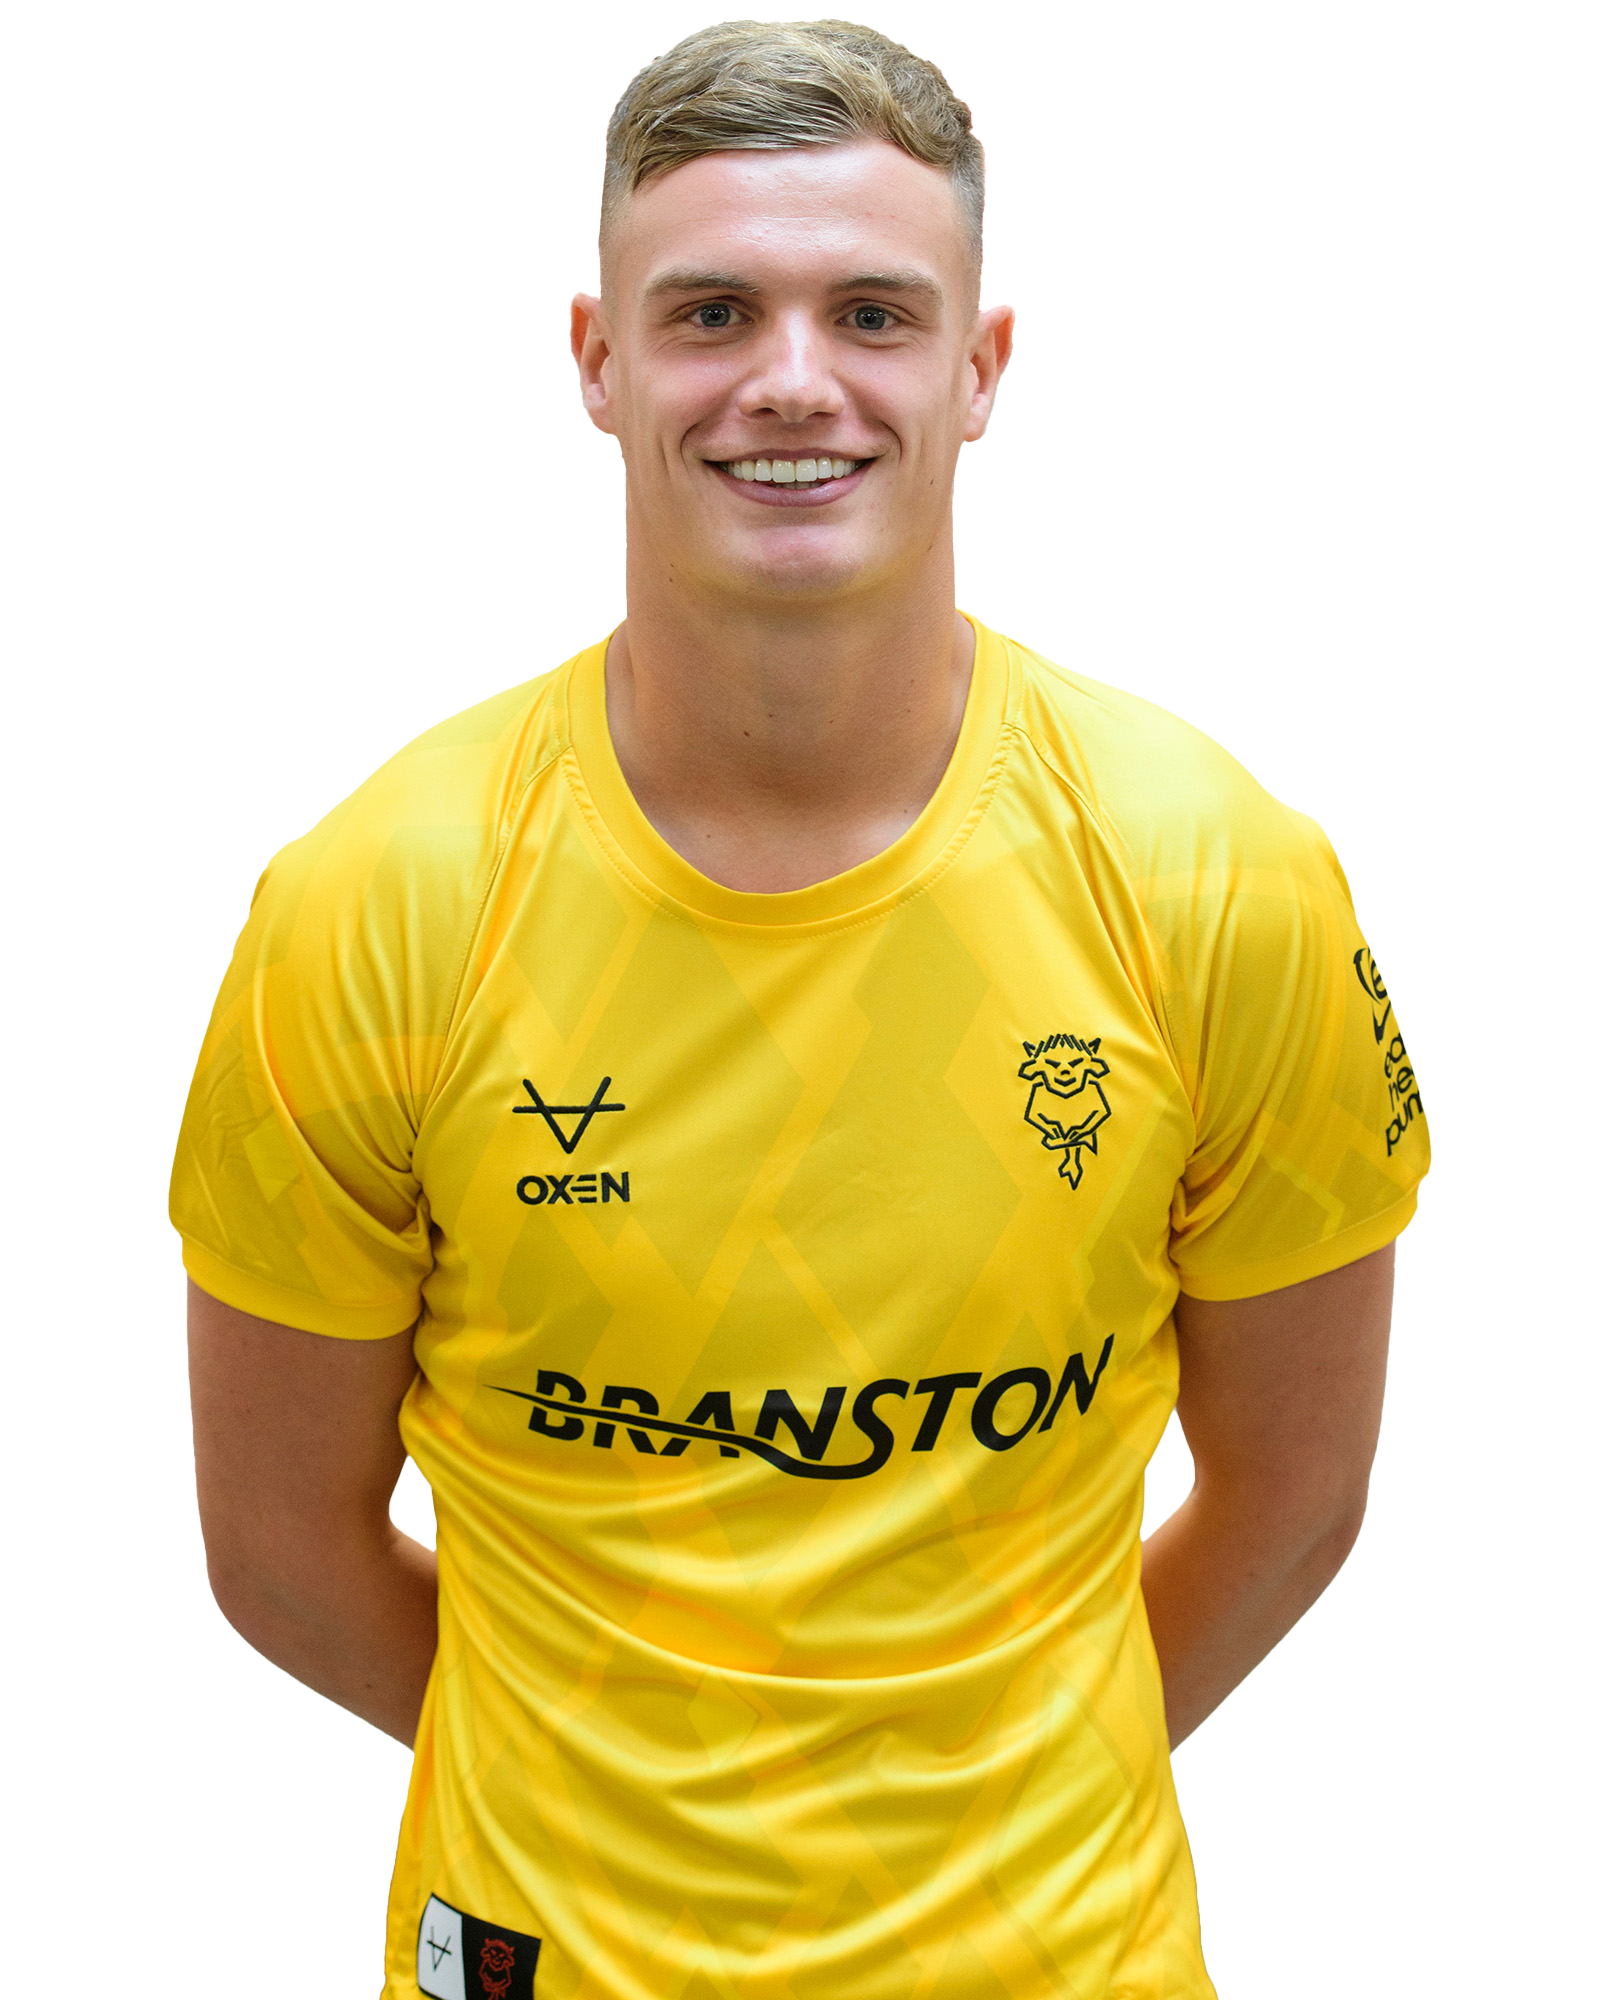 George Wickens poses for a picture wearing an all-yellow goalkeeper top.